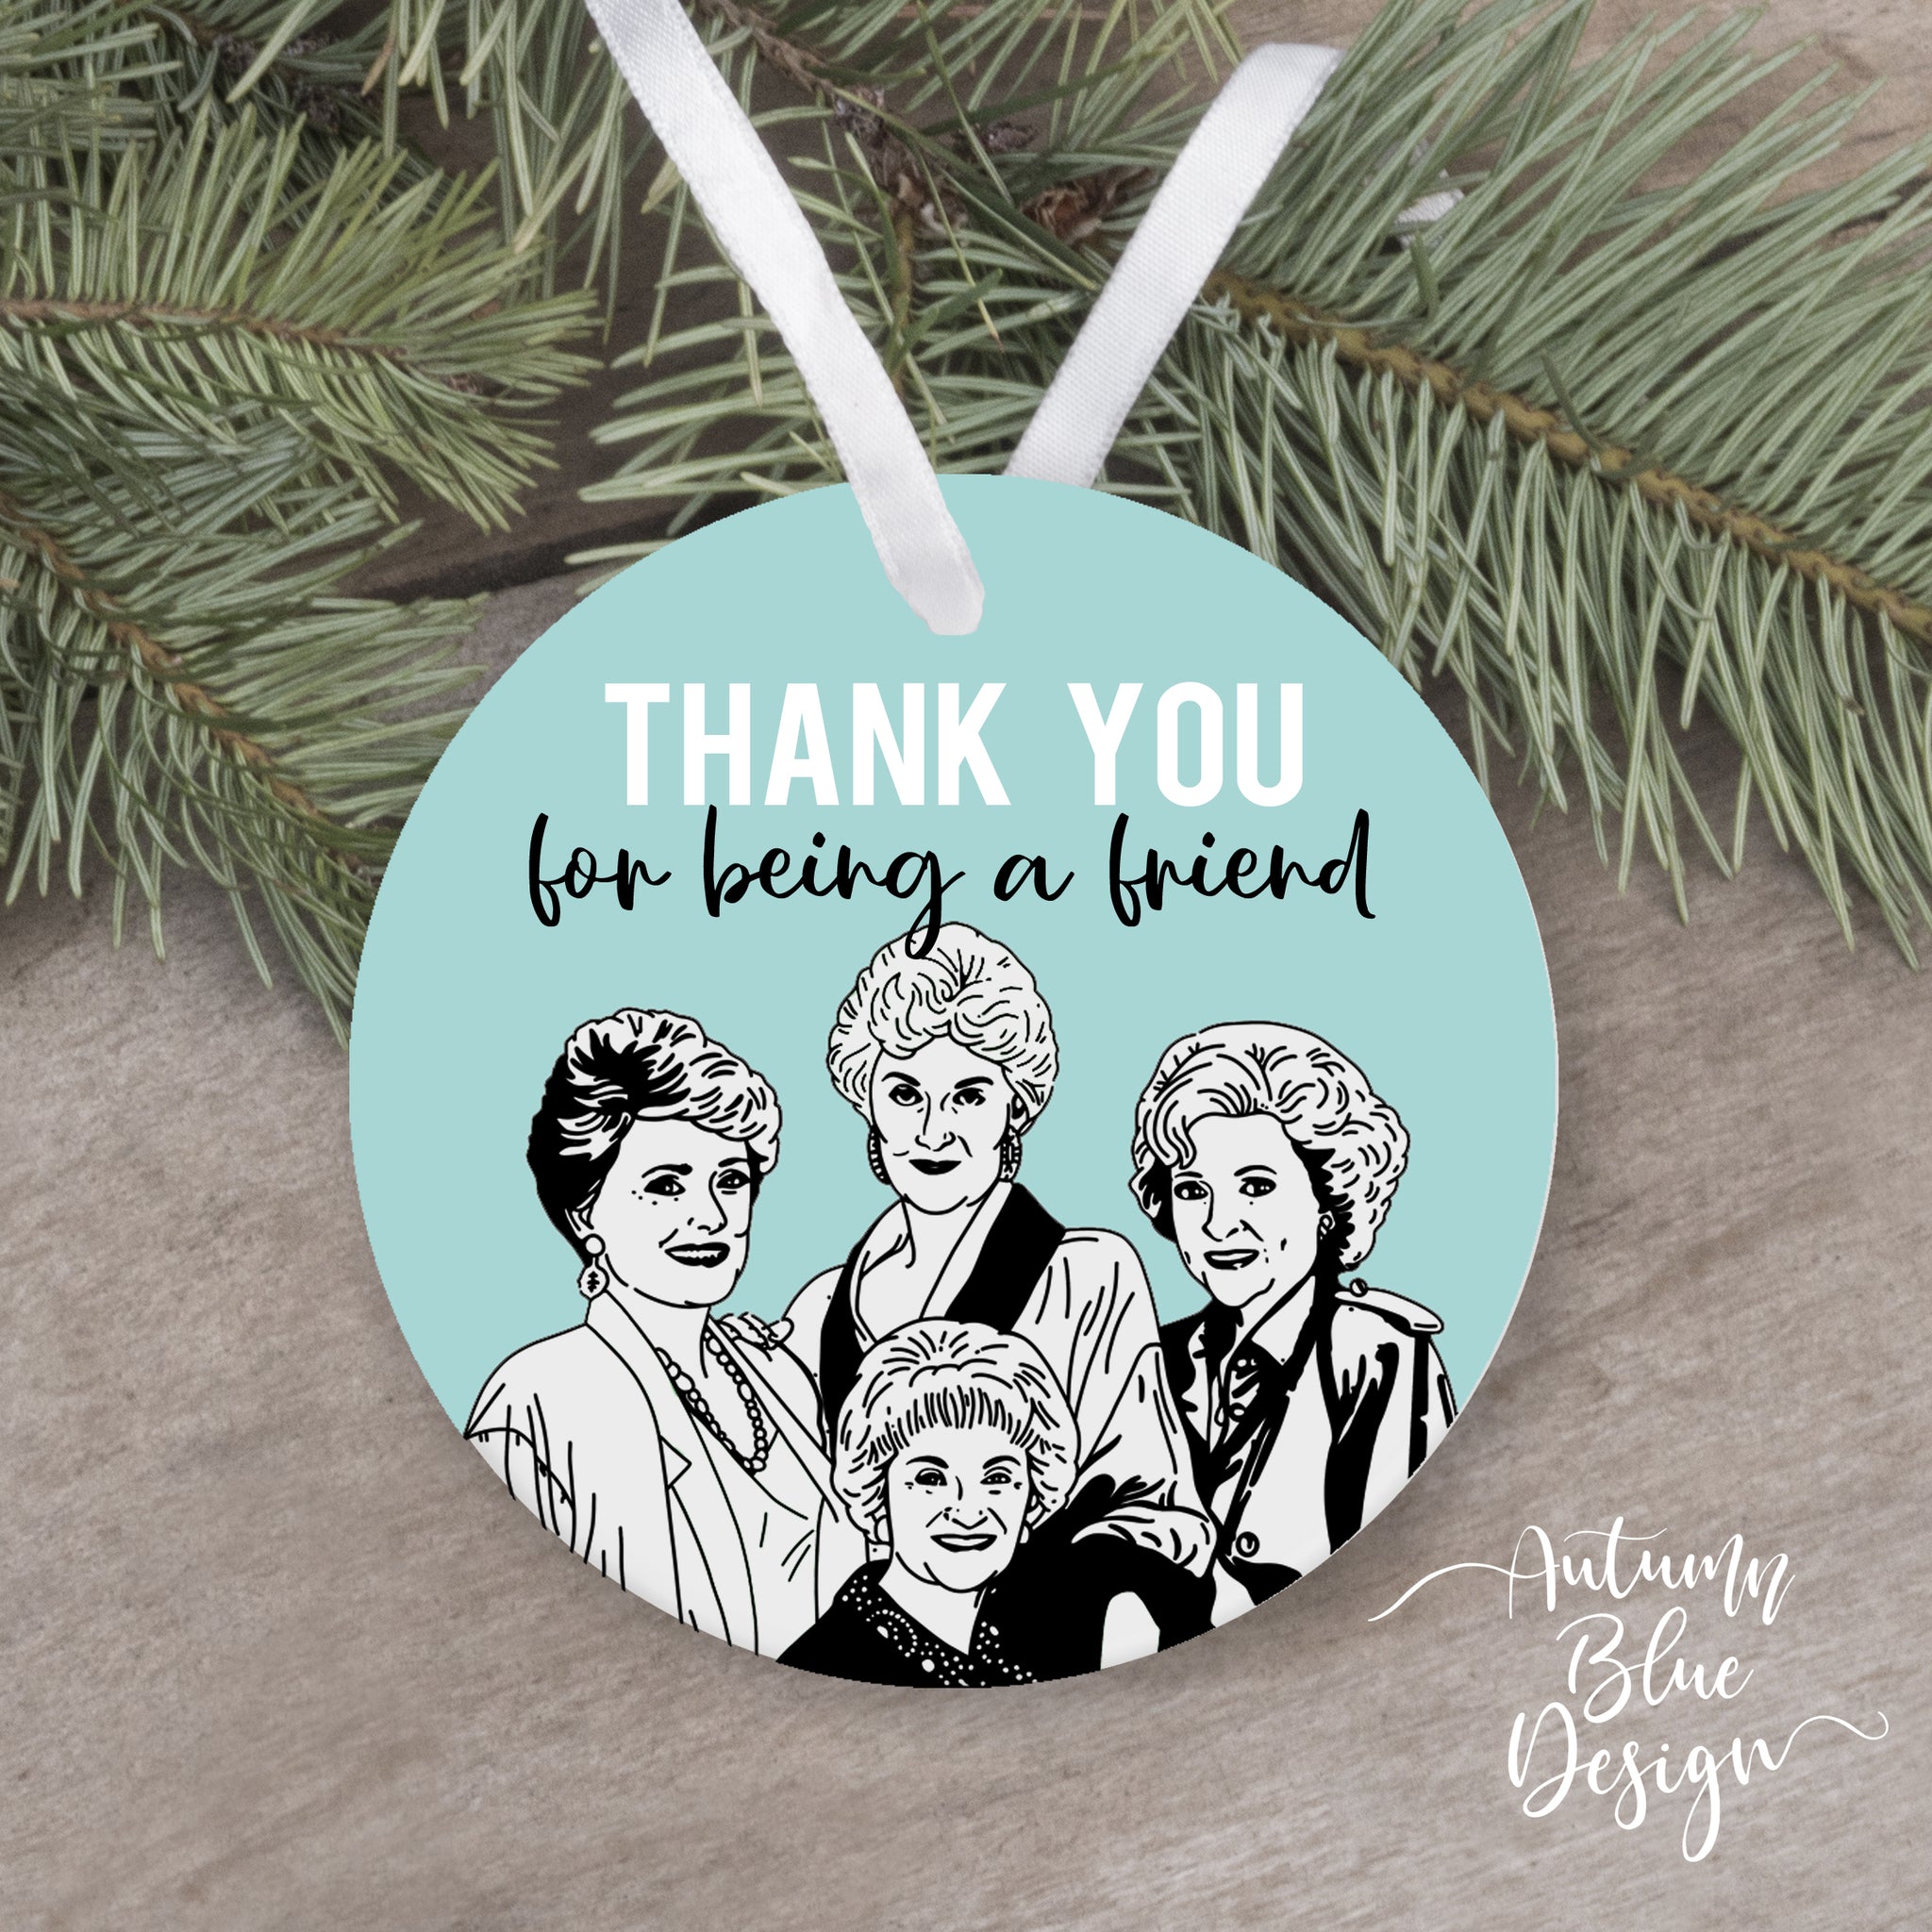 "Thank You For Being a Friend" Golden Girls Themed Ornament (Teal Colour) - B2BW